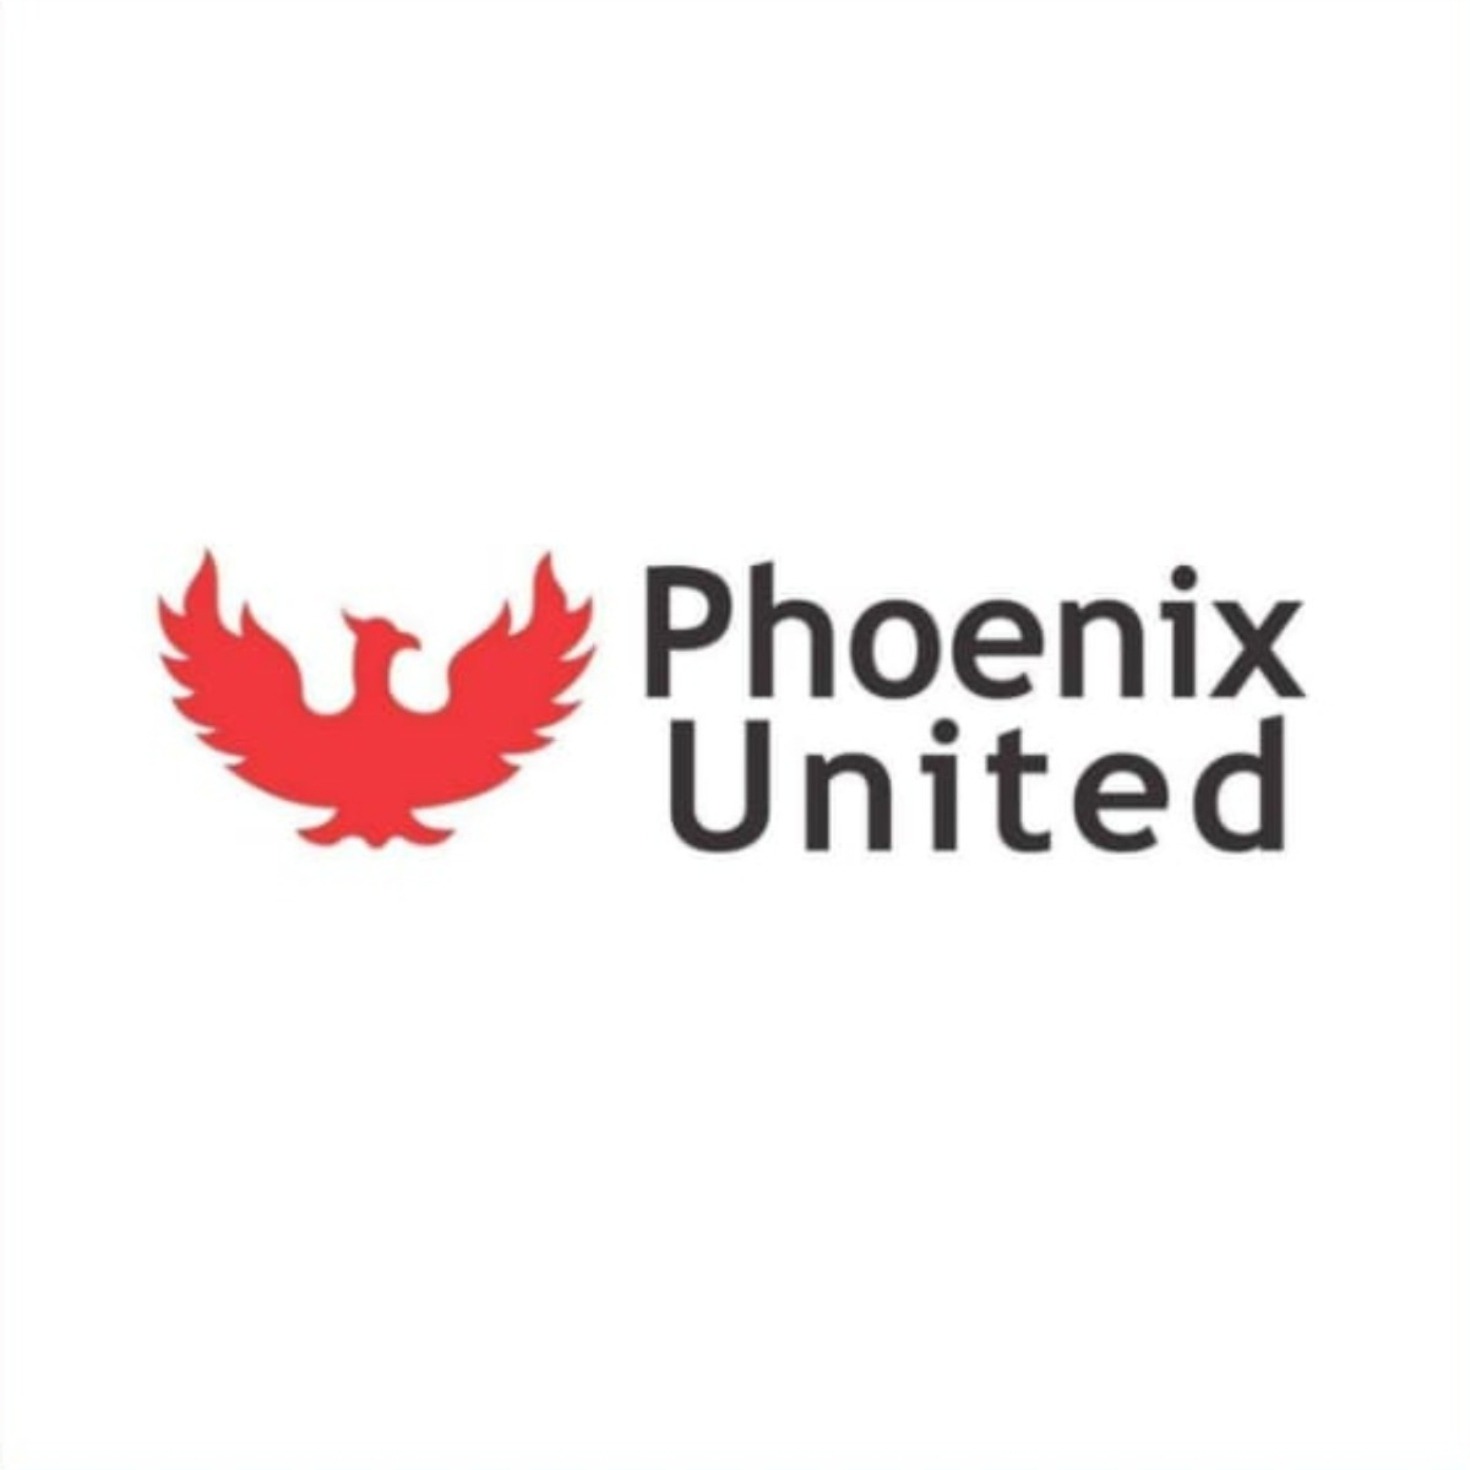 Phoenix United Alambagh buzzes with Christmas carnival and shopping excitement